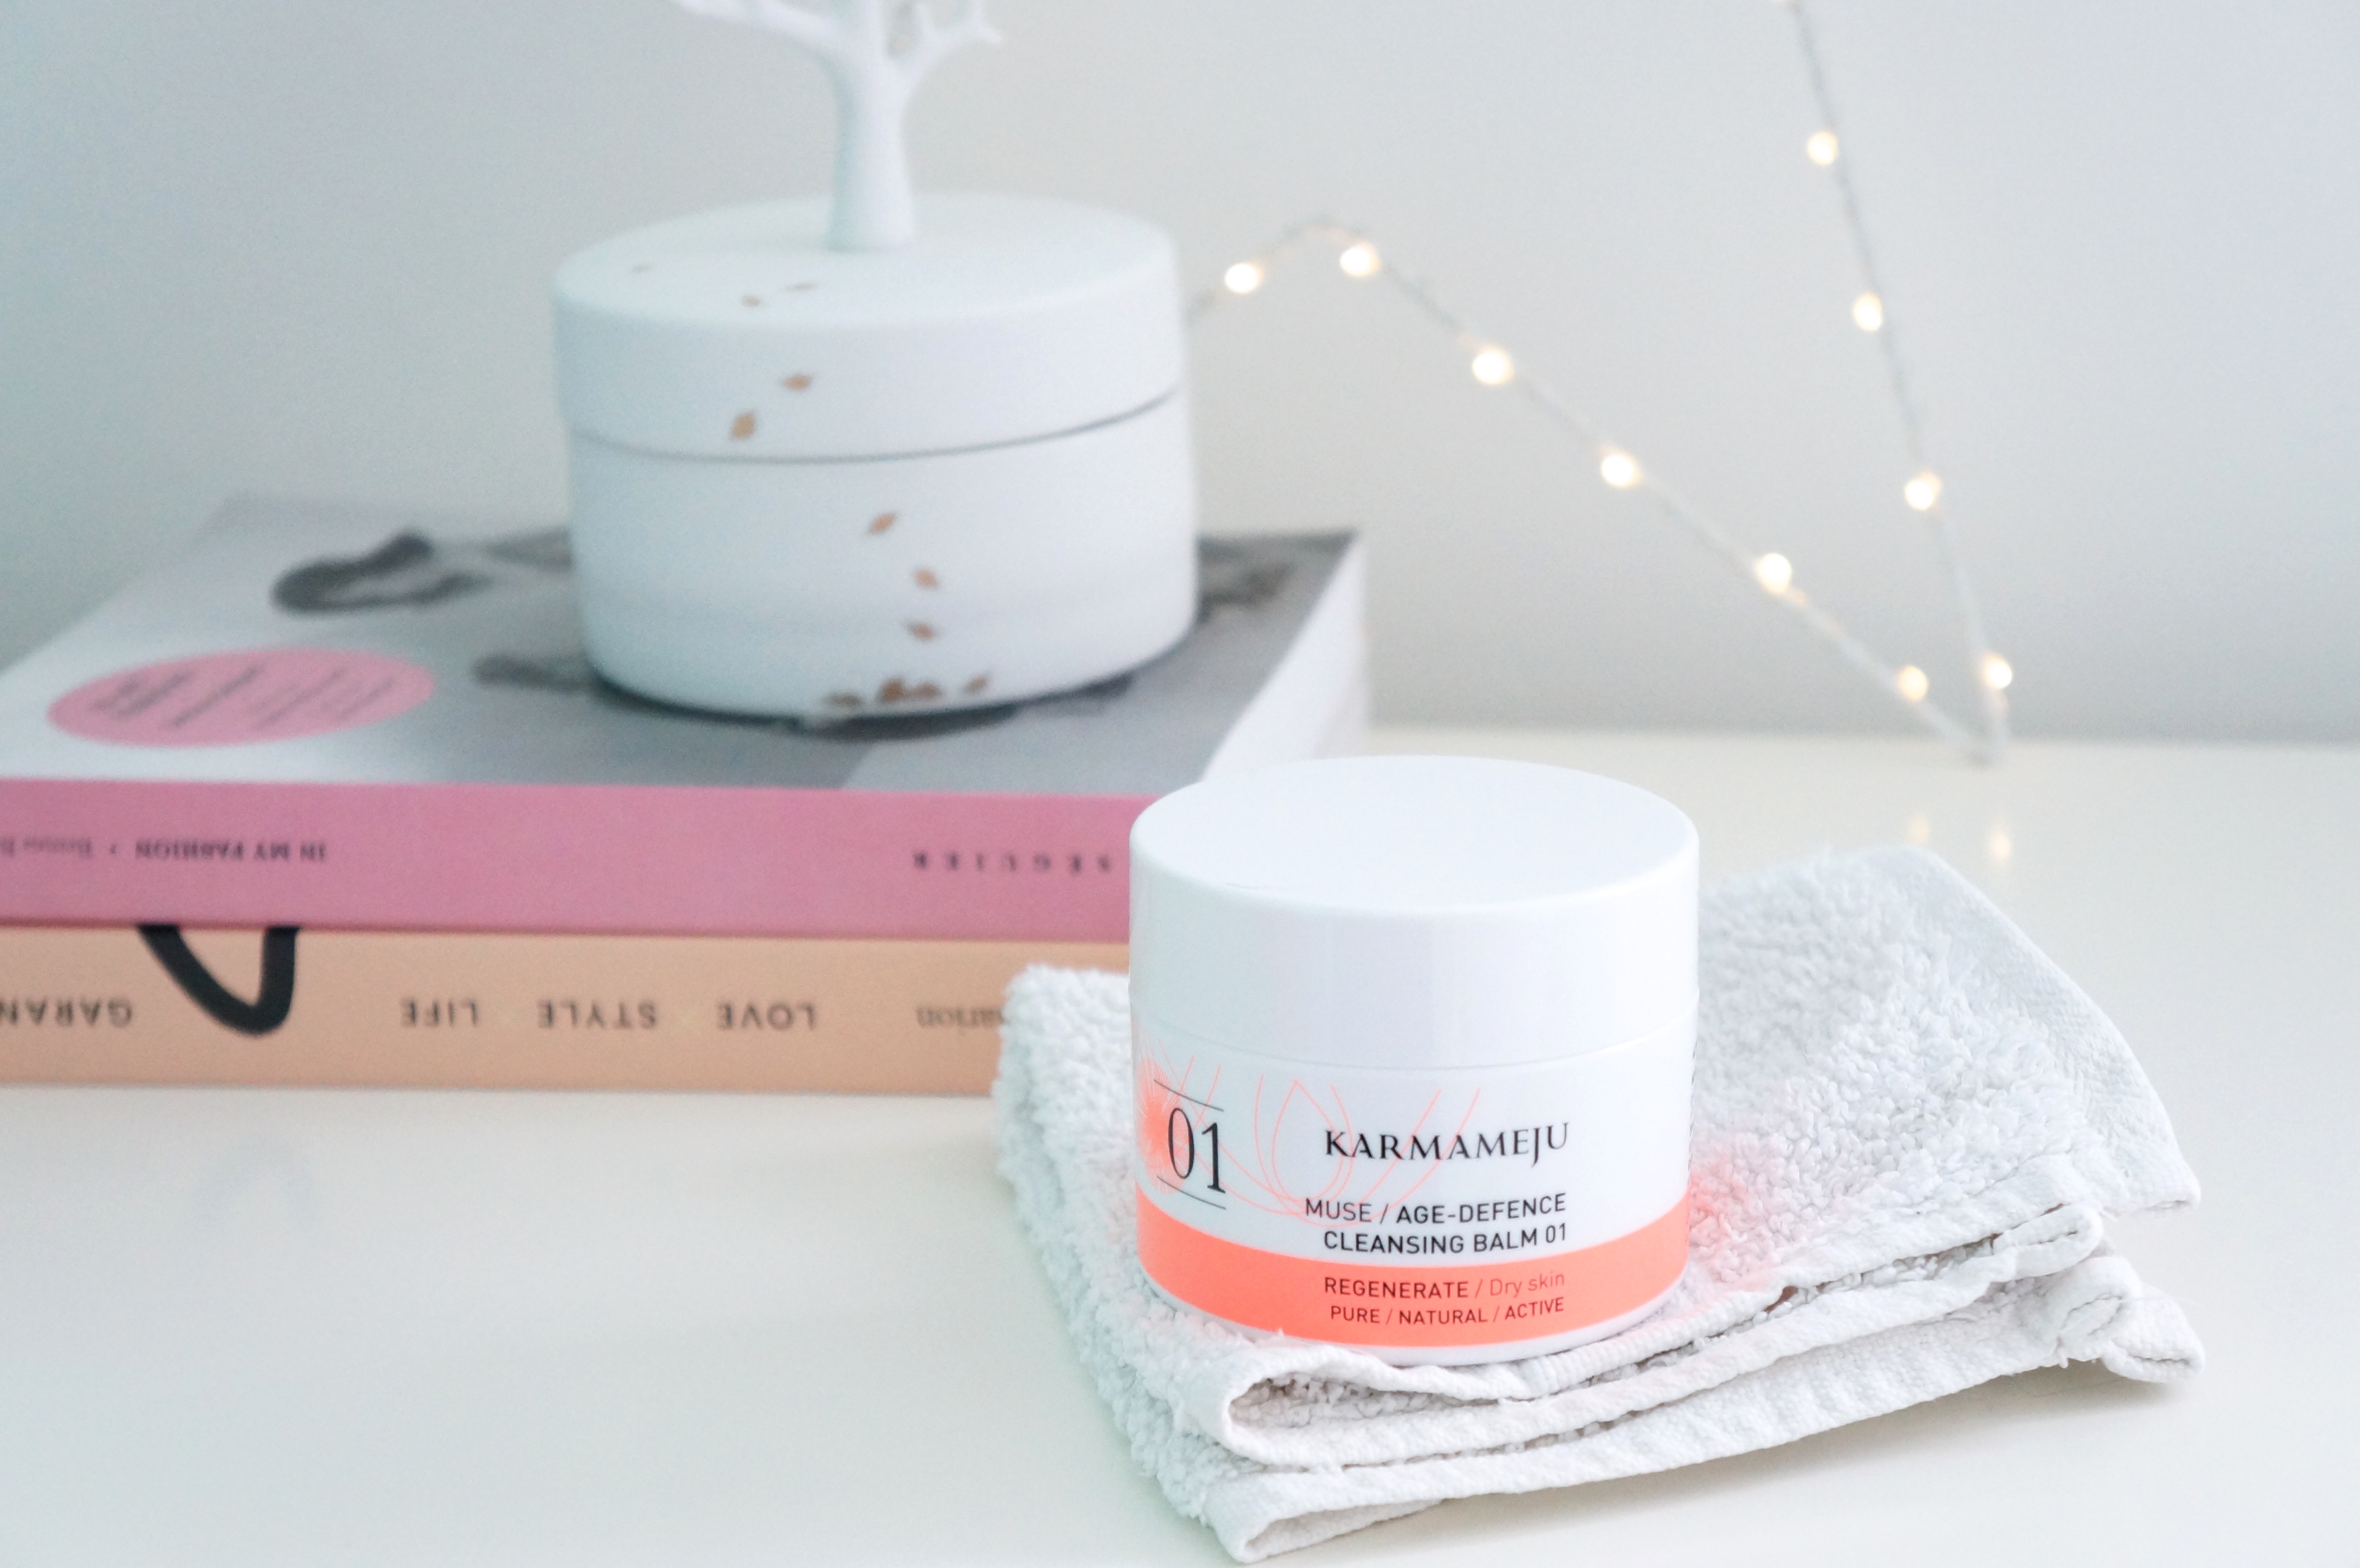 Muse Cleansing Balm by Karmameju/ Pic by 1FDLE.